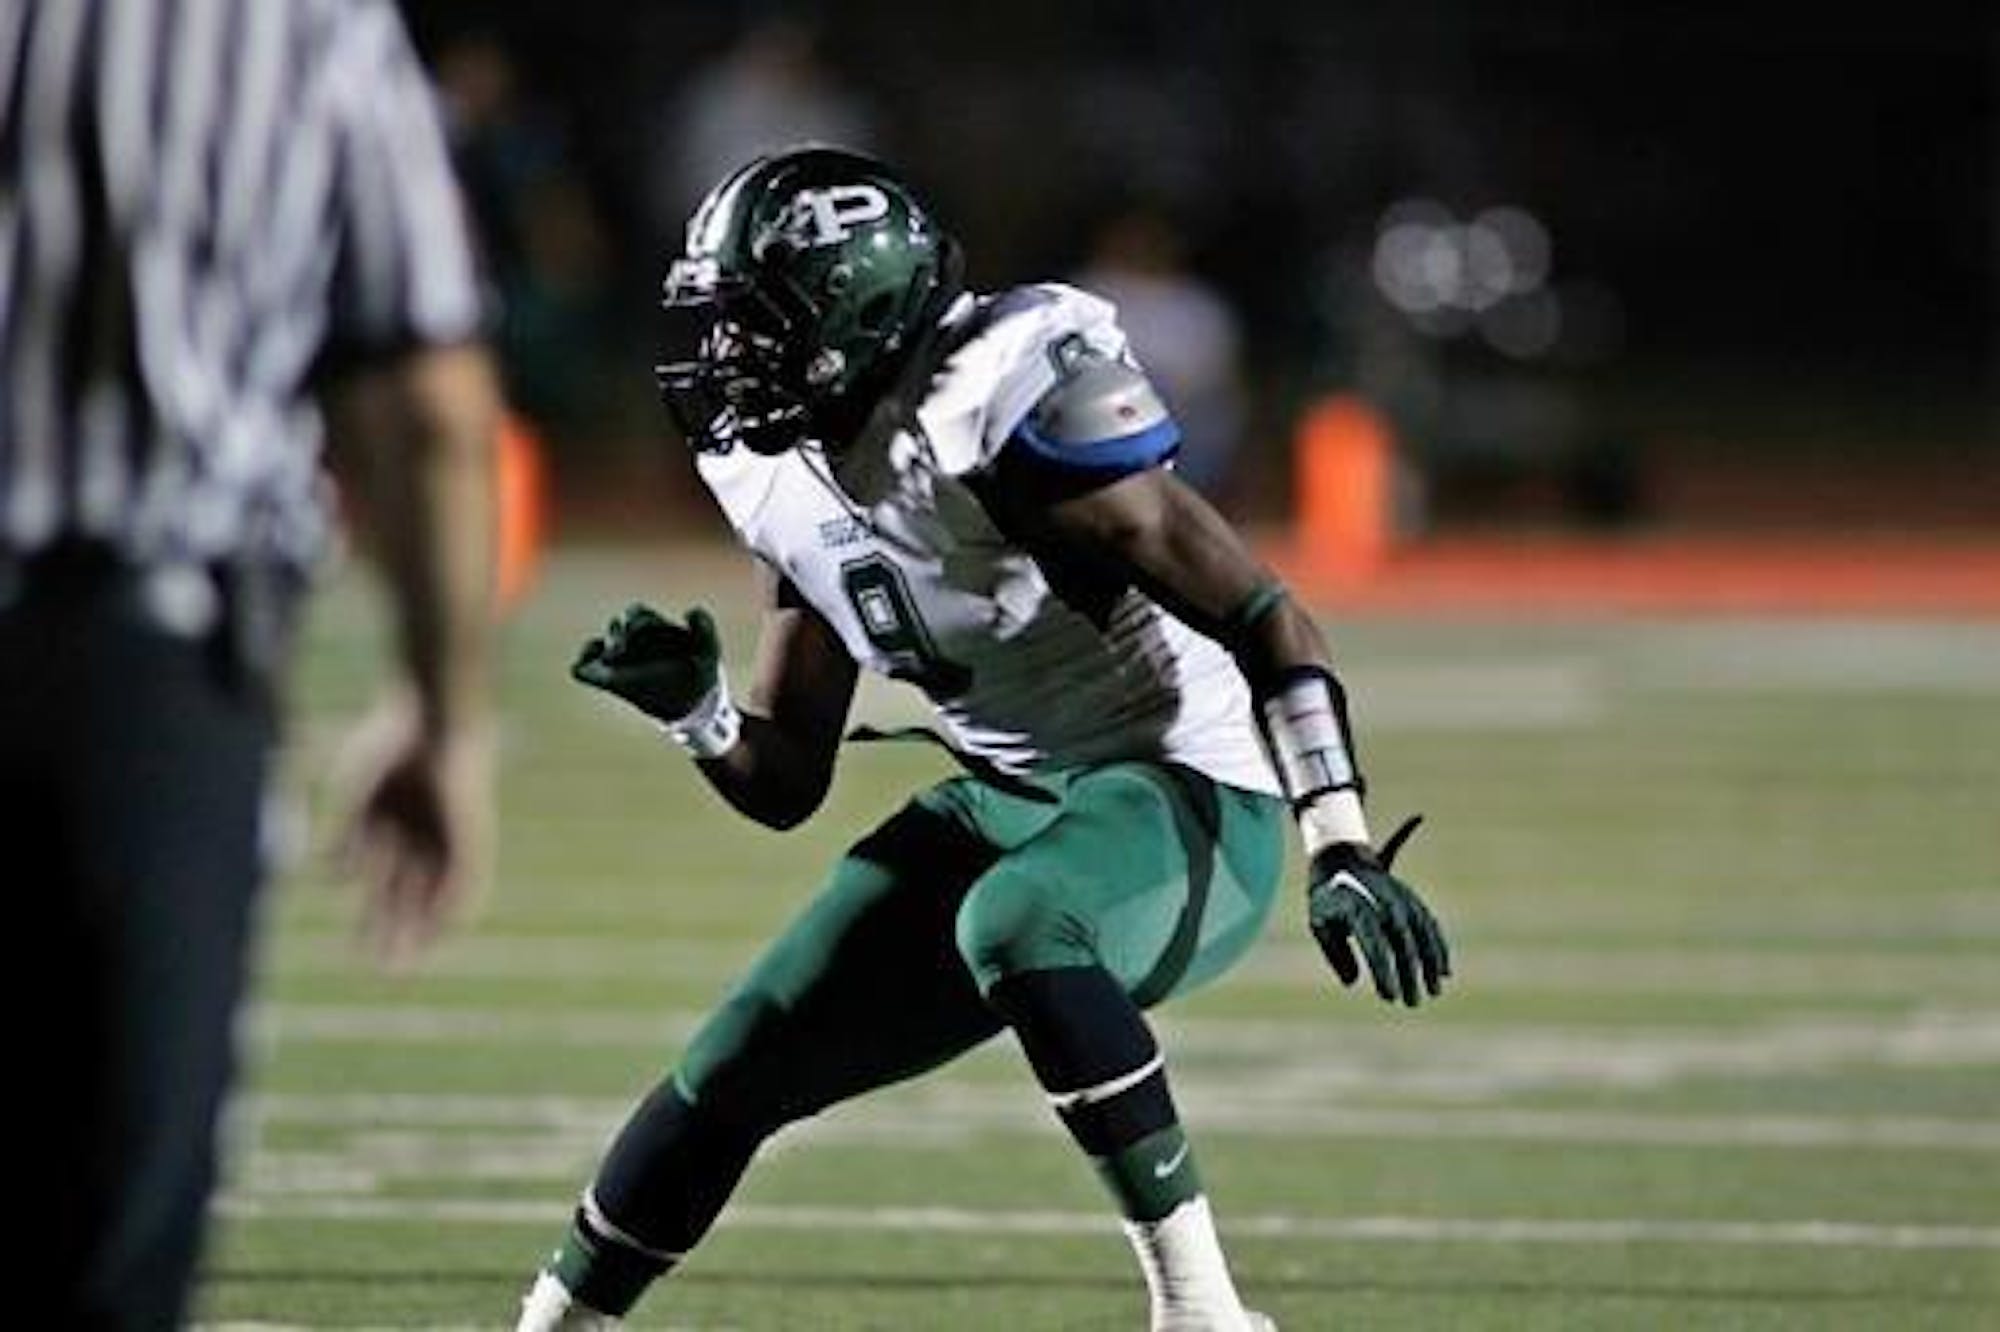 Black male wearing a white and green football uniform backpedals during a football game.